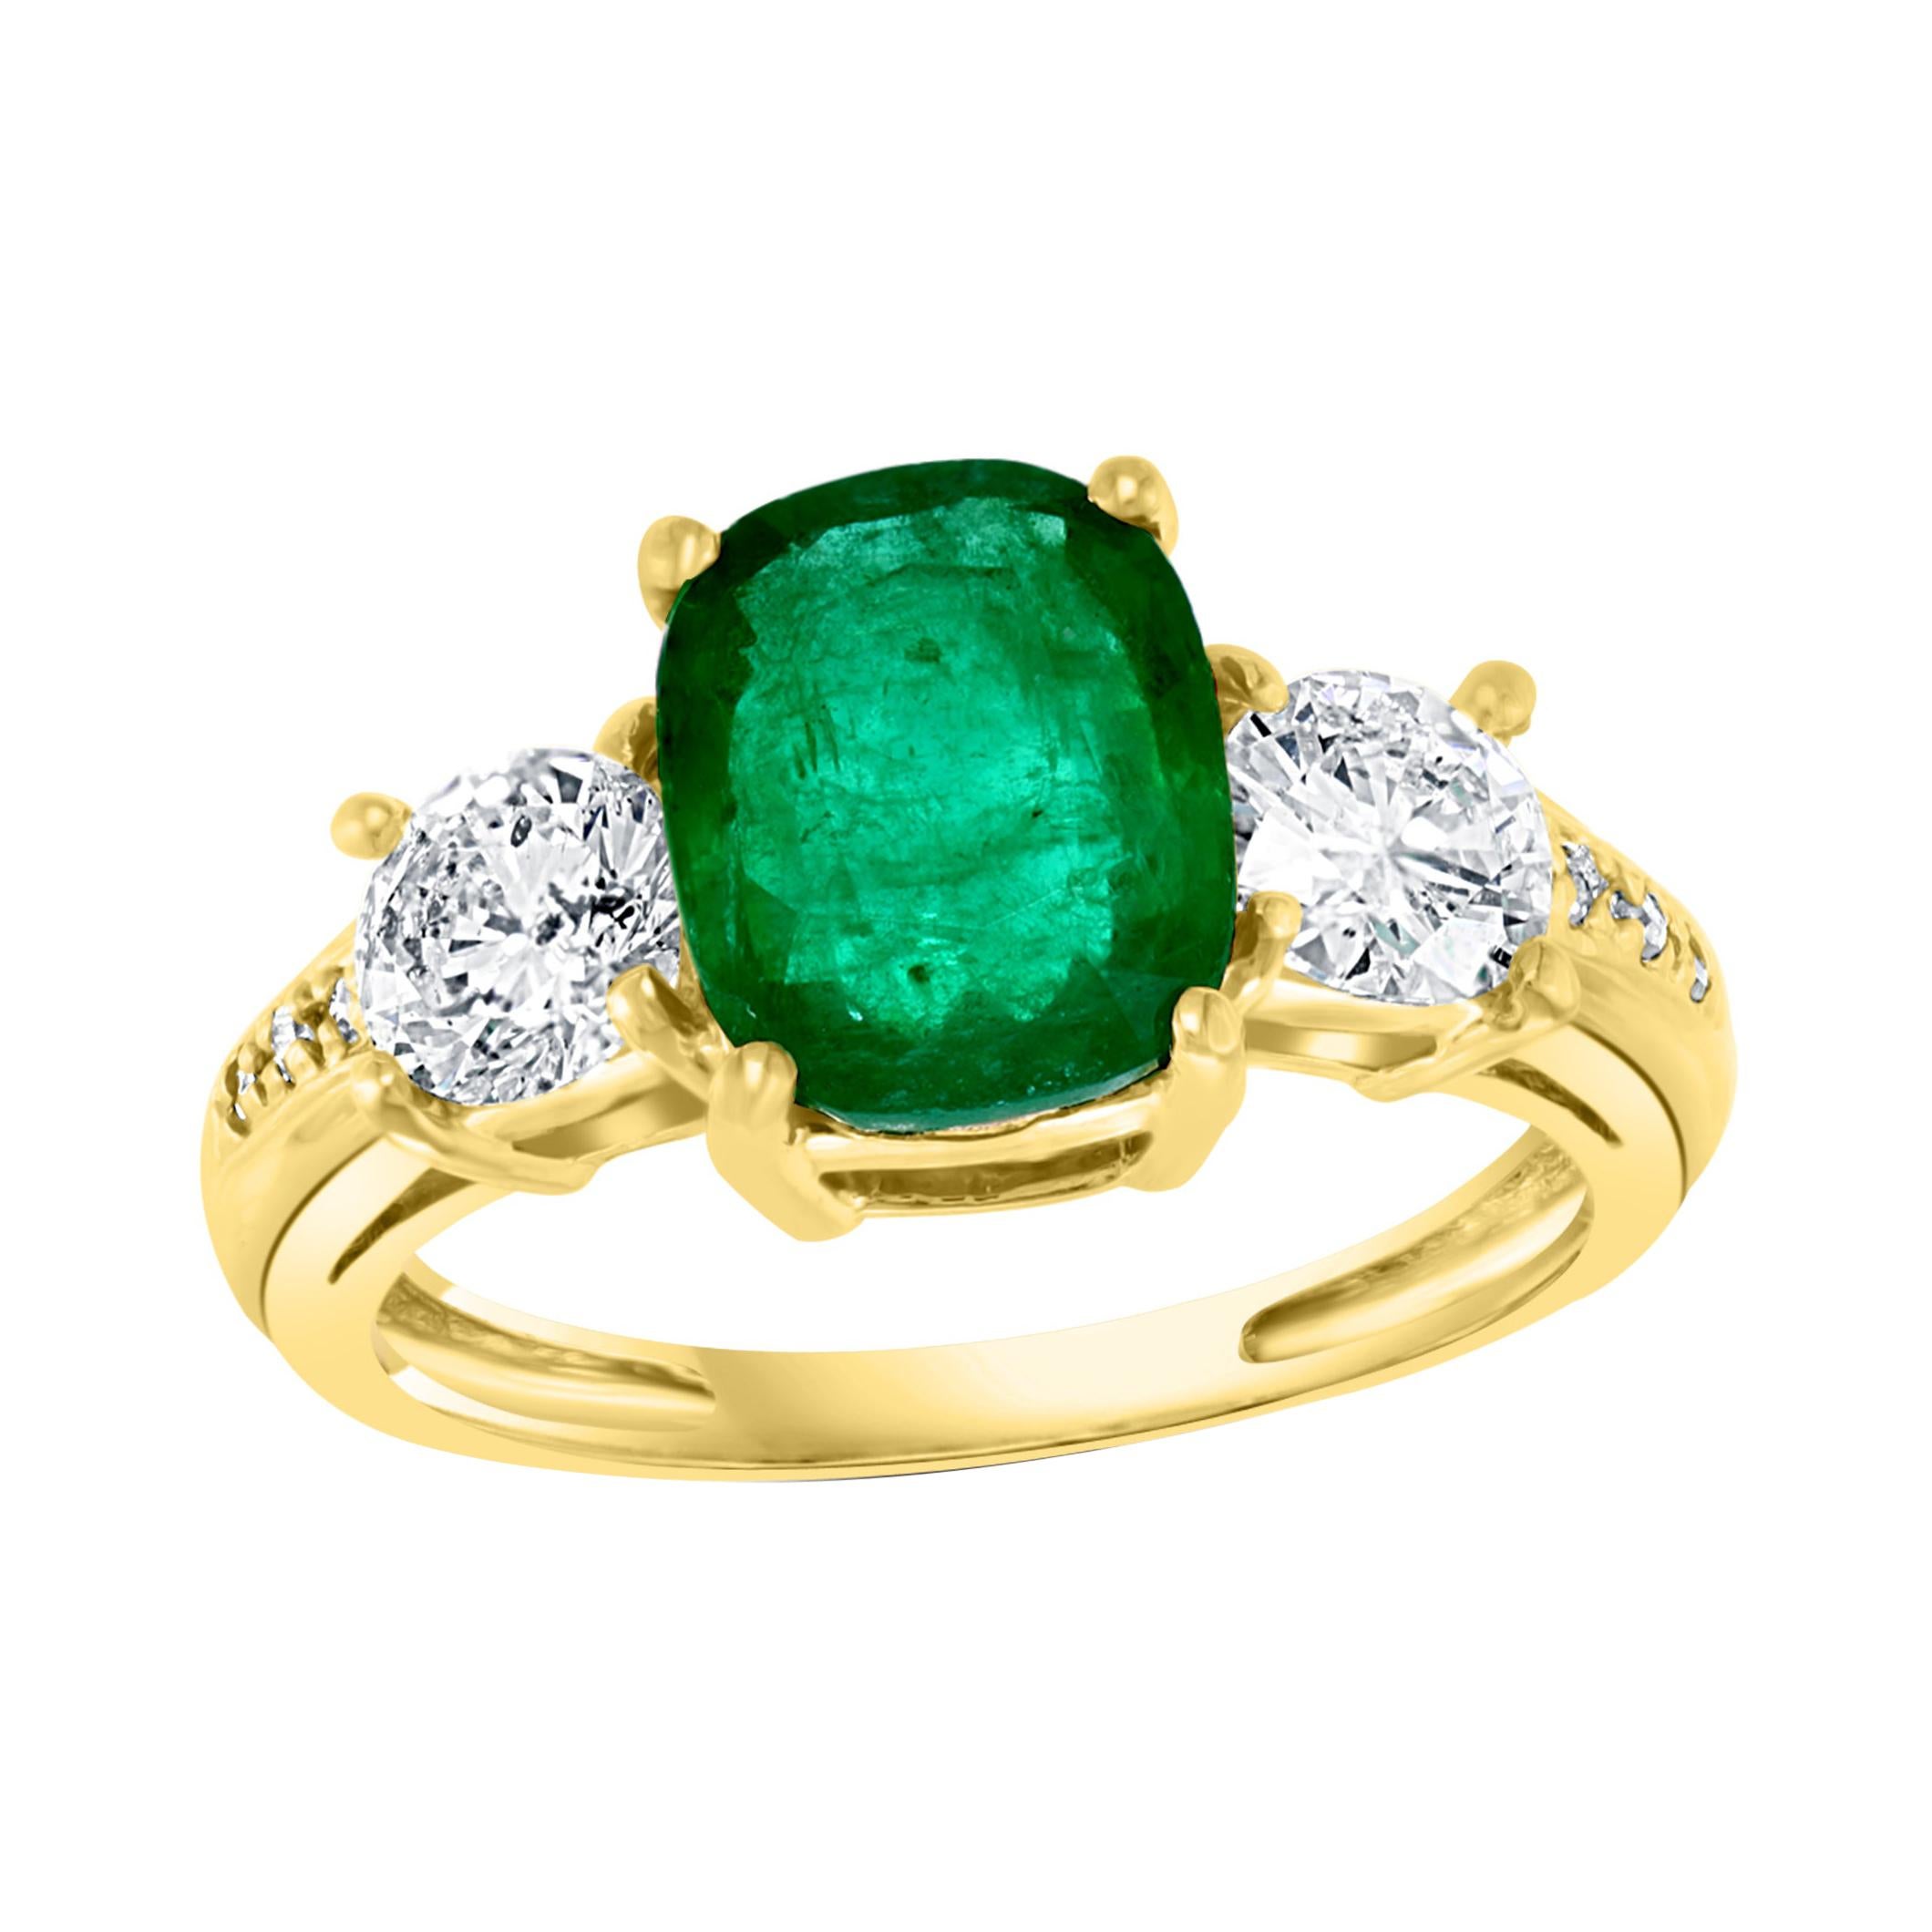 3 Carat Natural Cushion Cut Emerald & 2 Solitaire Diamond Ring 14 Kt Yellow Gold For Sale